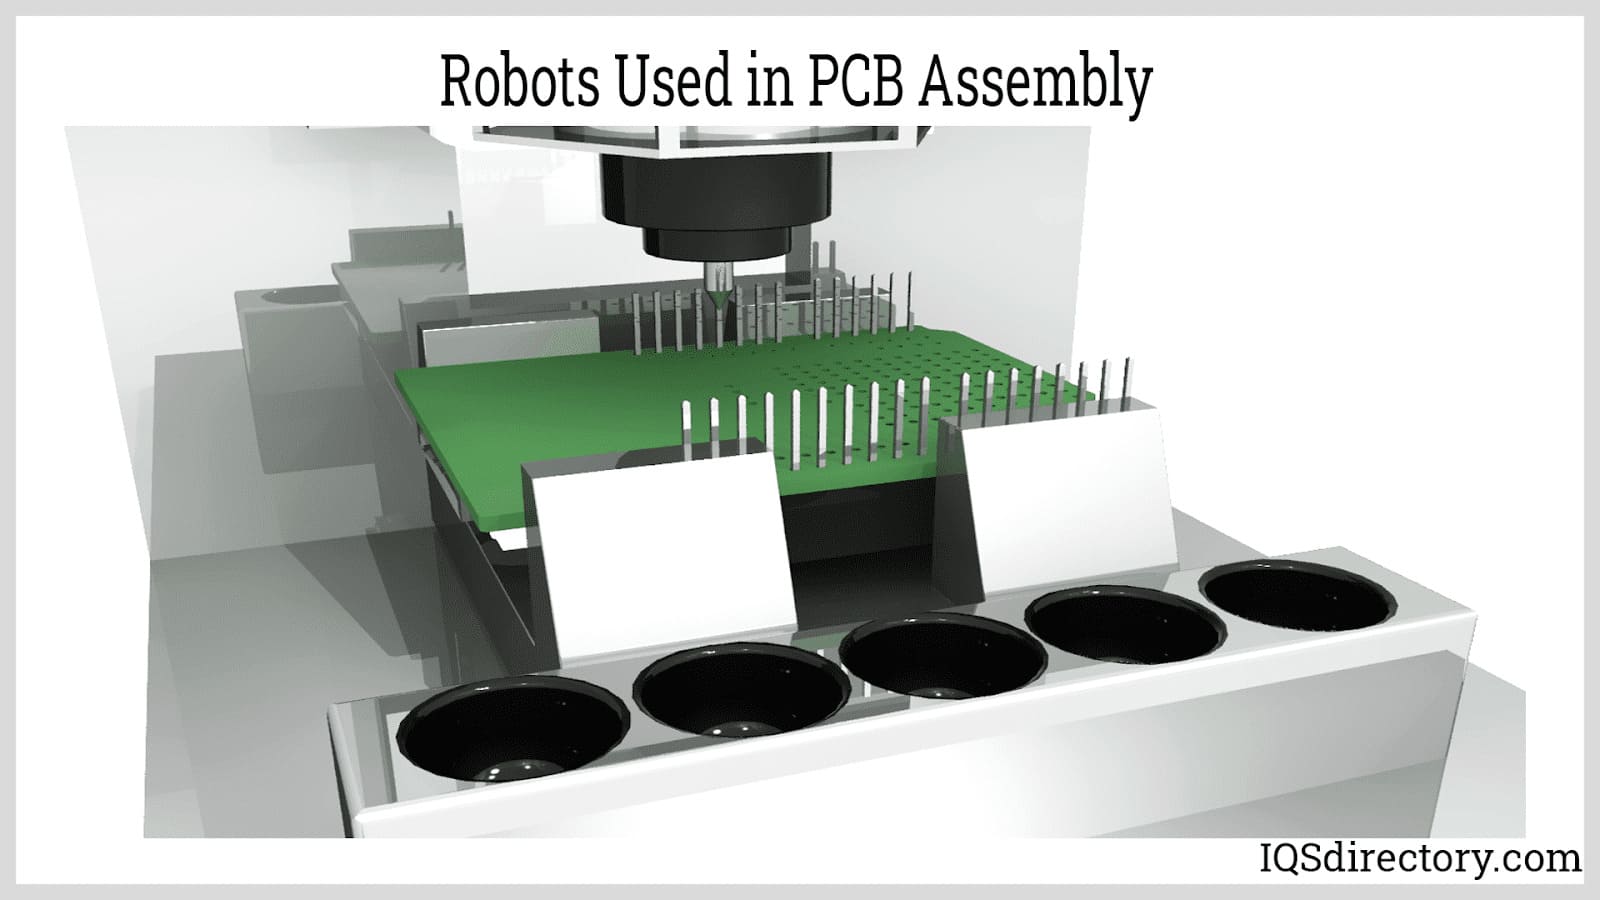 Robots Used in PCB Assembly